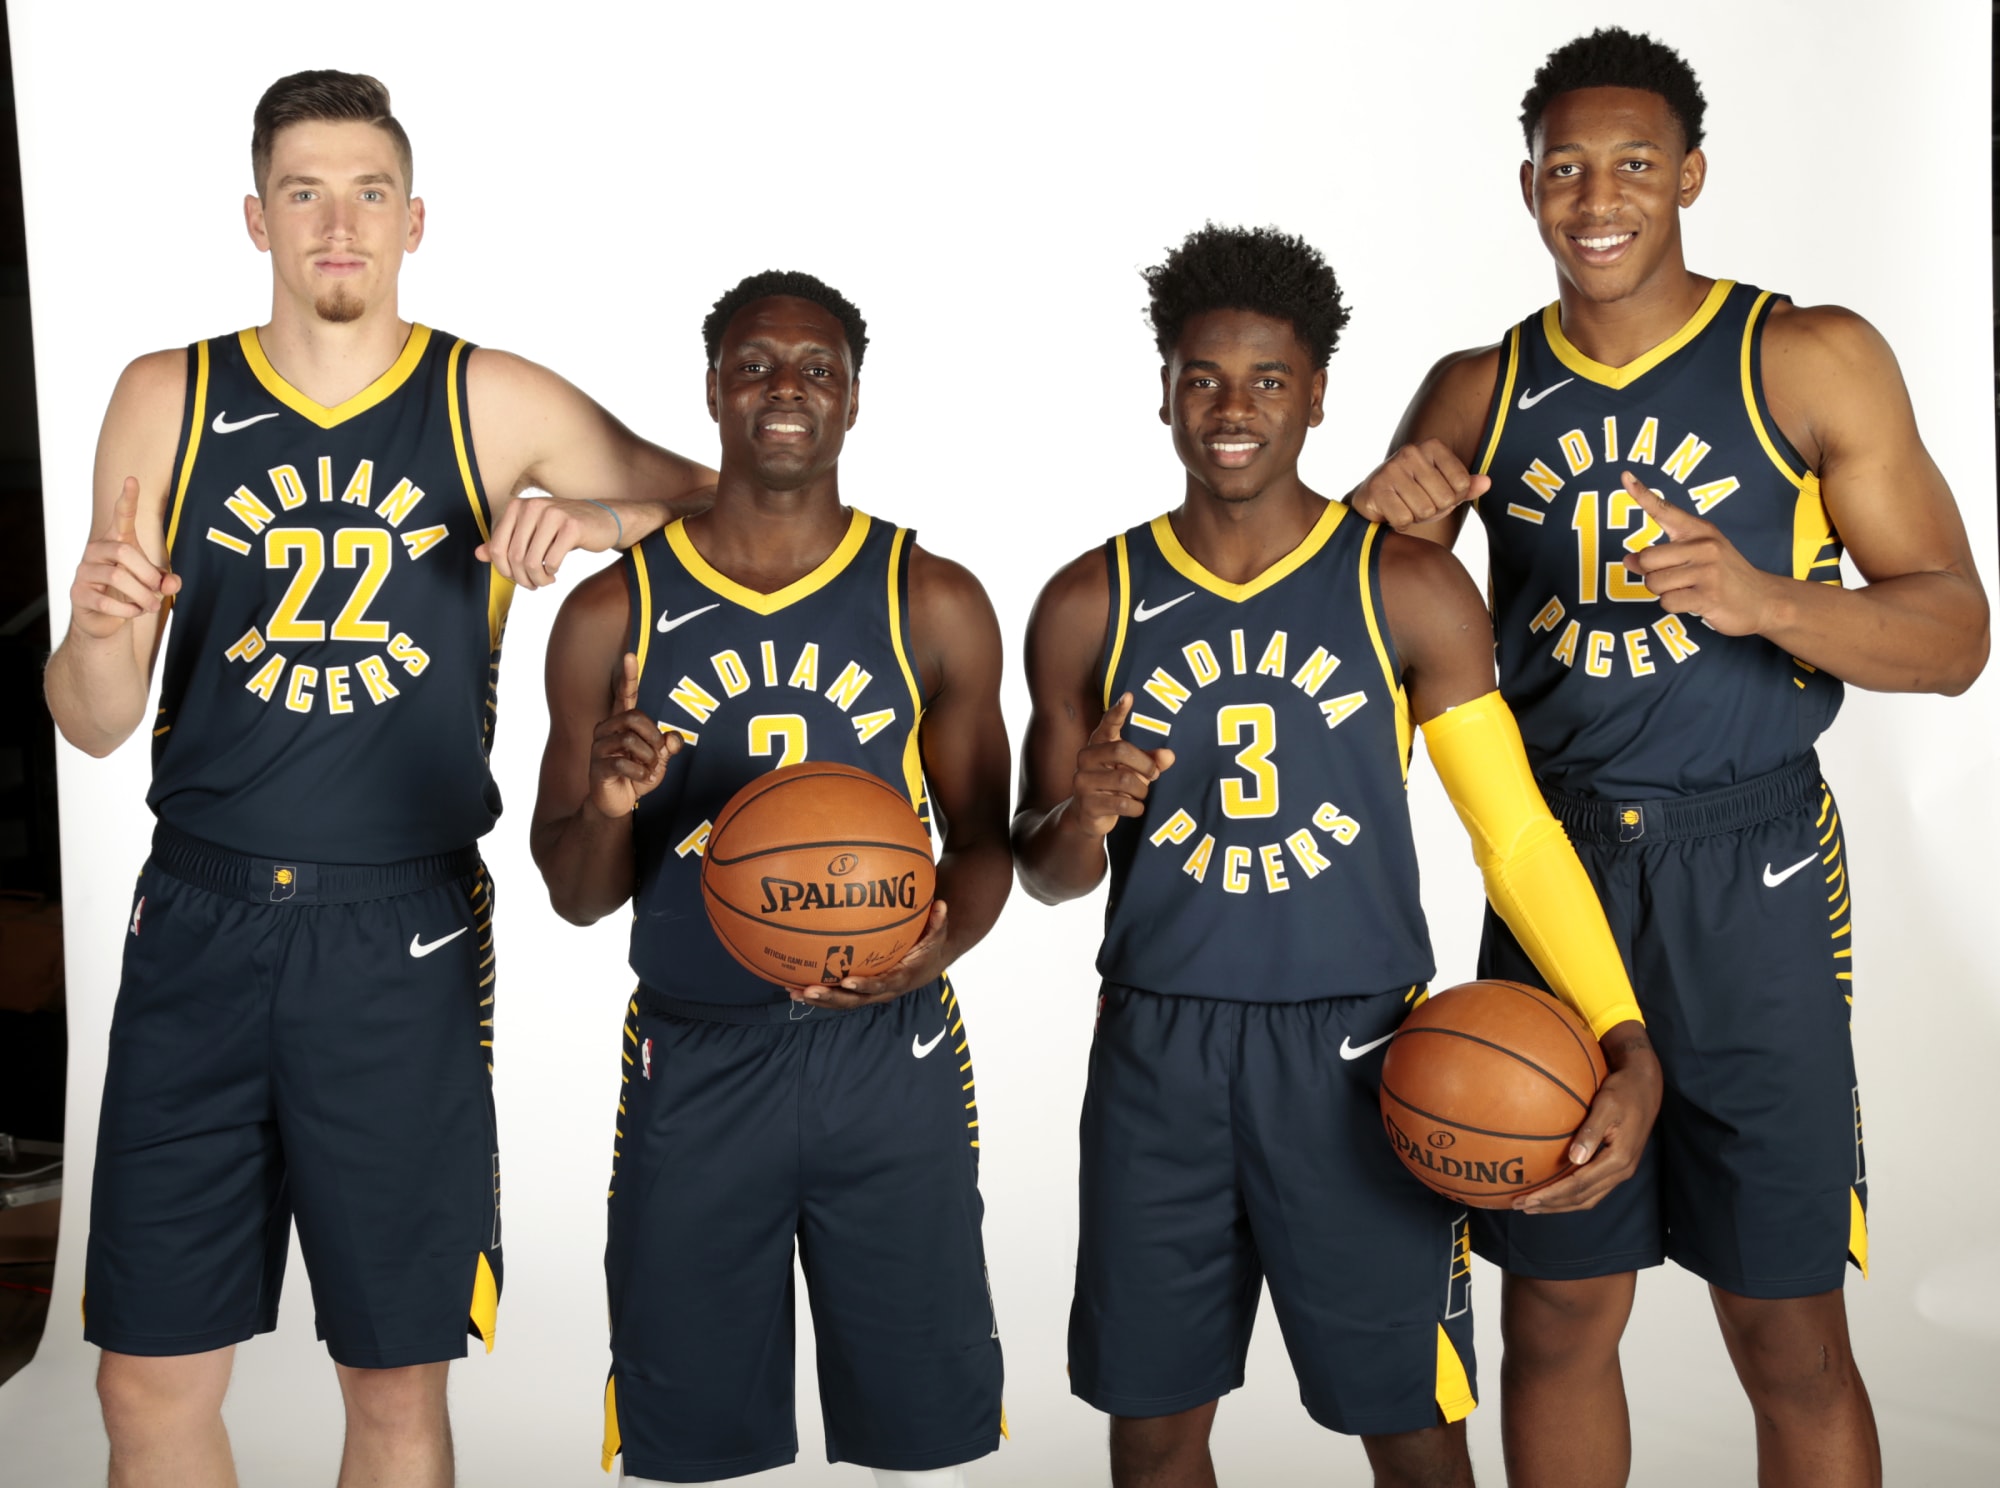 The Indiana Pacers Now featuring more than 8 rotation players!